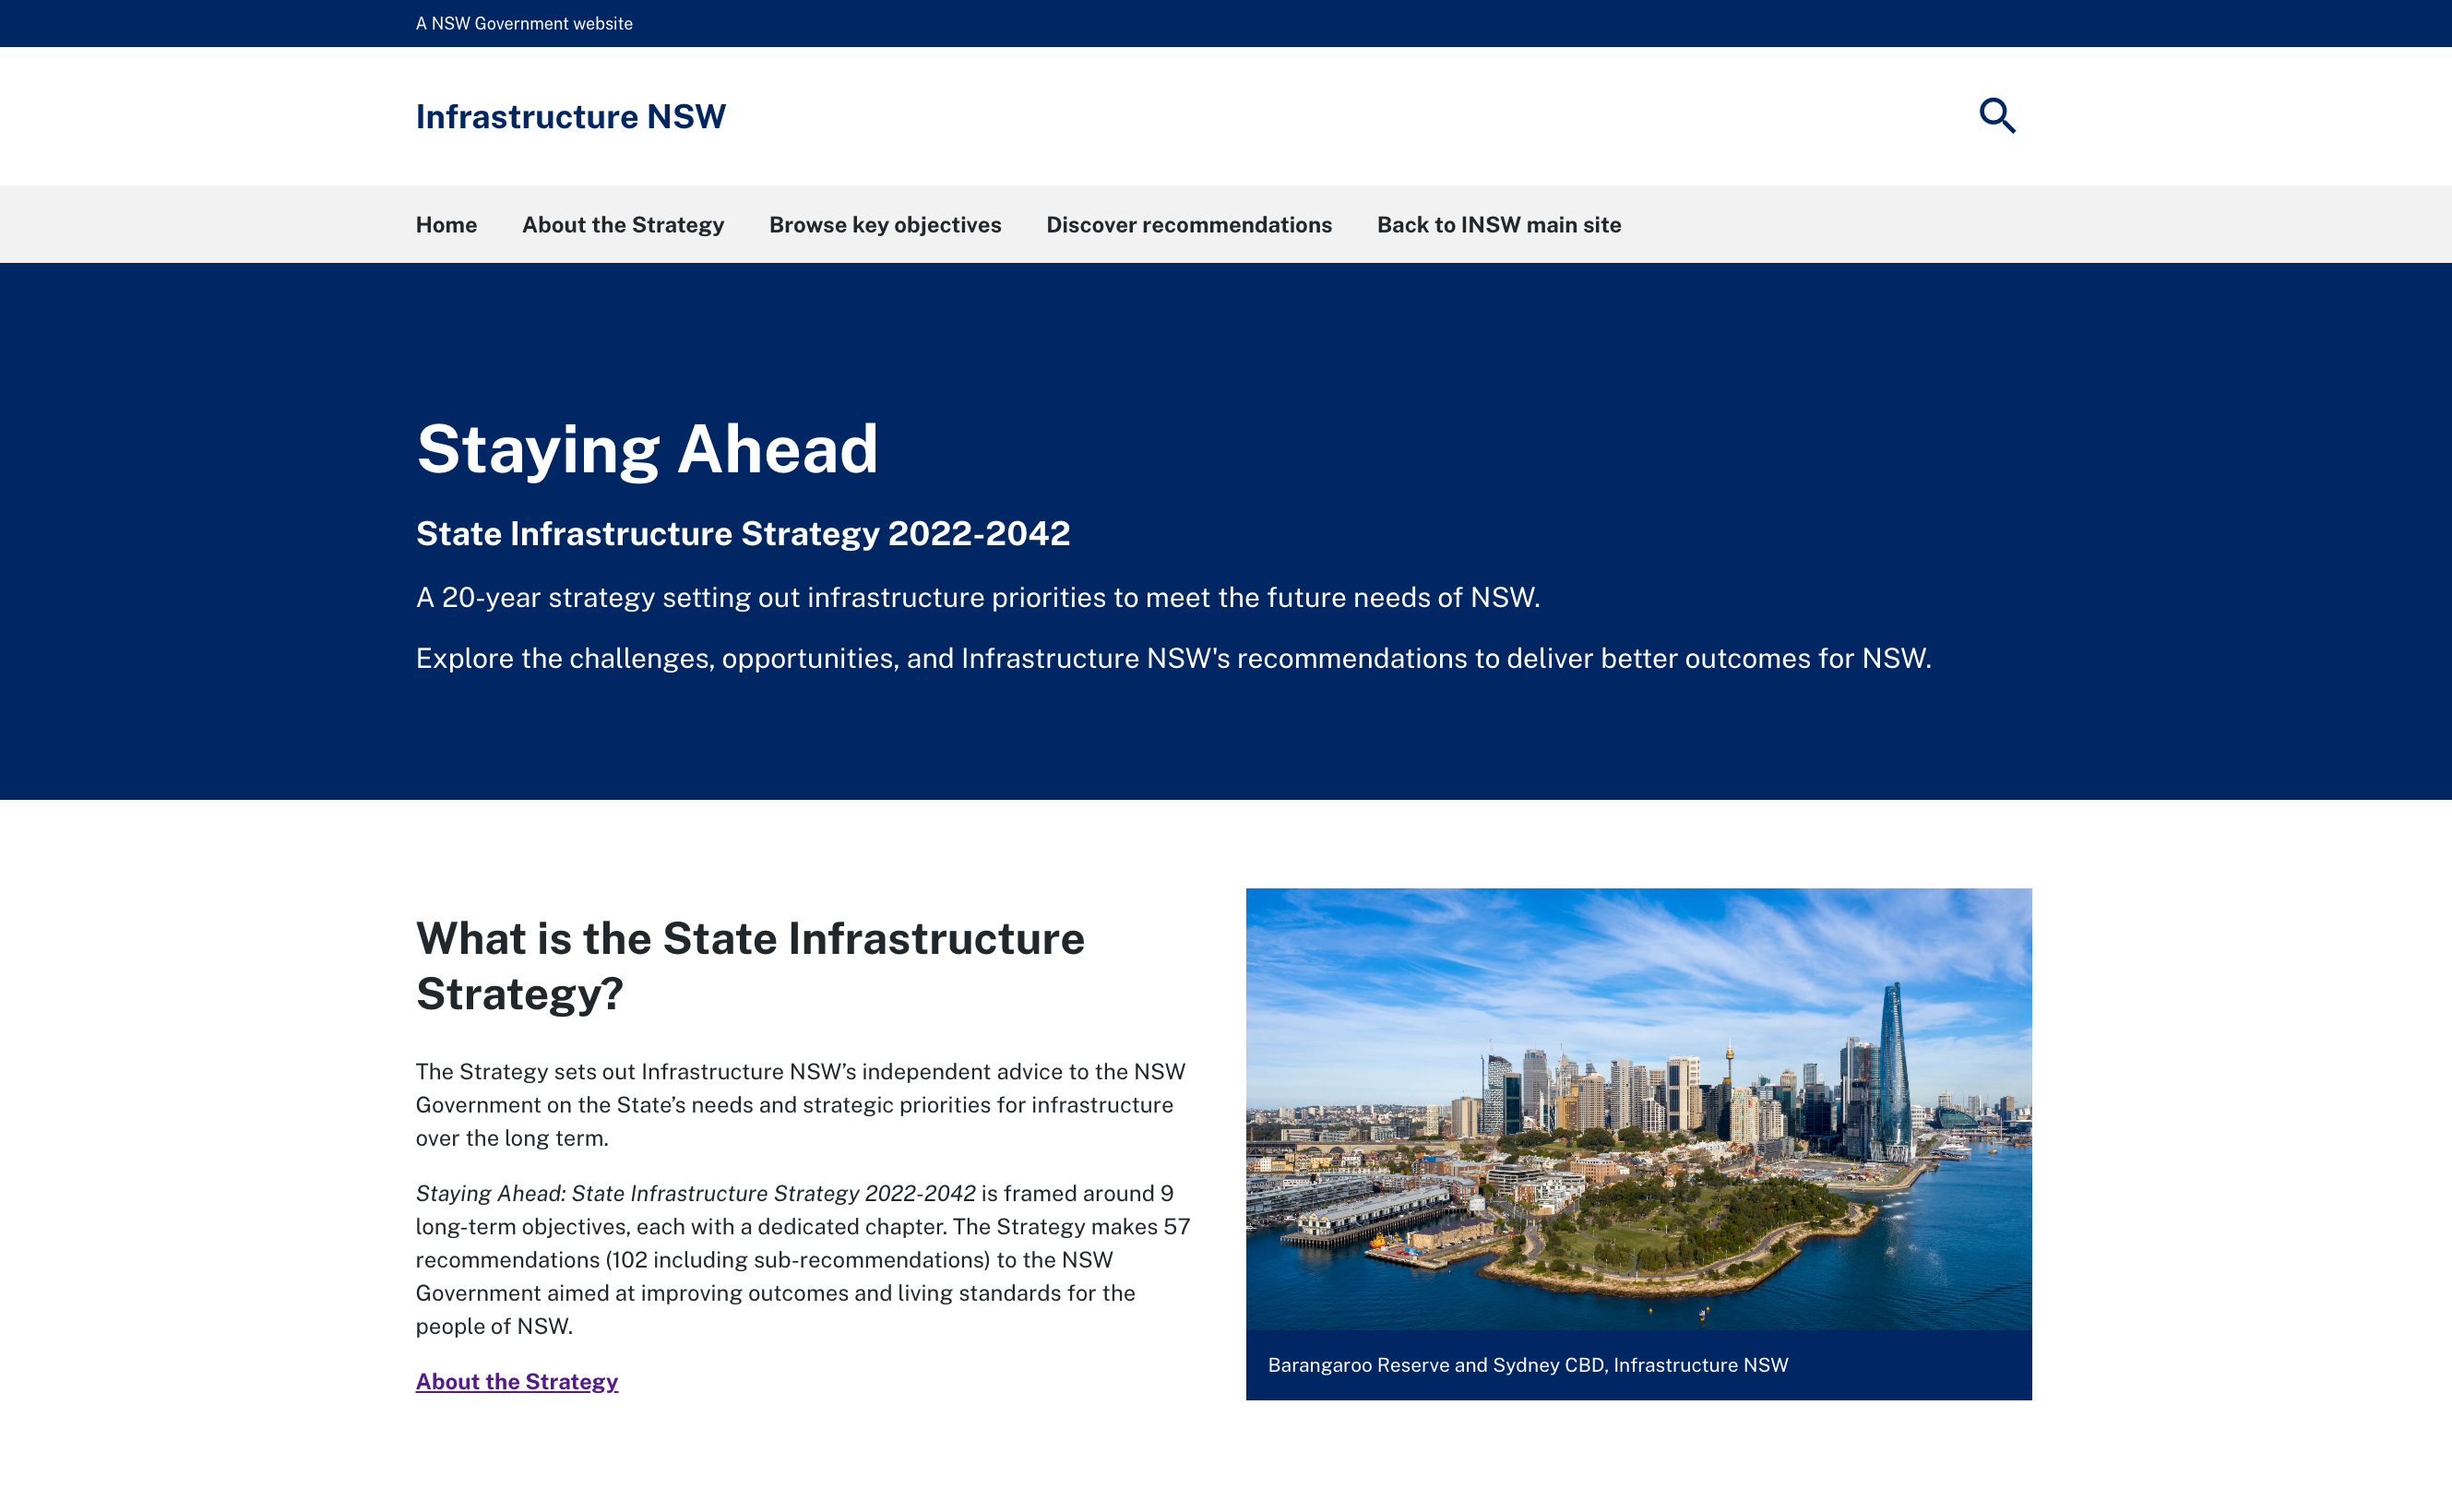 The homepage of the State Infrastructure Strategy website